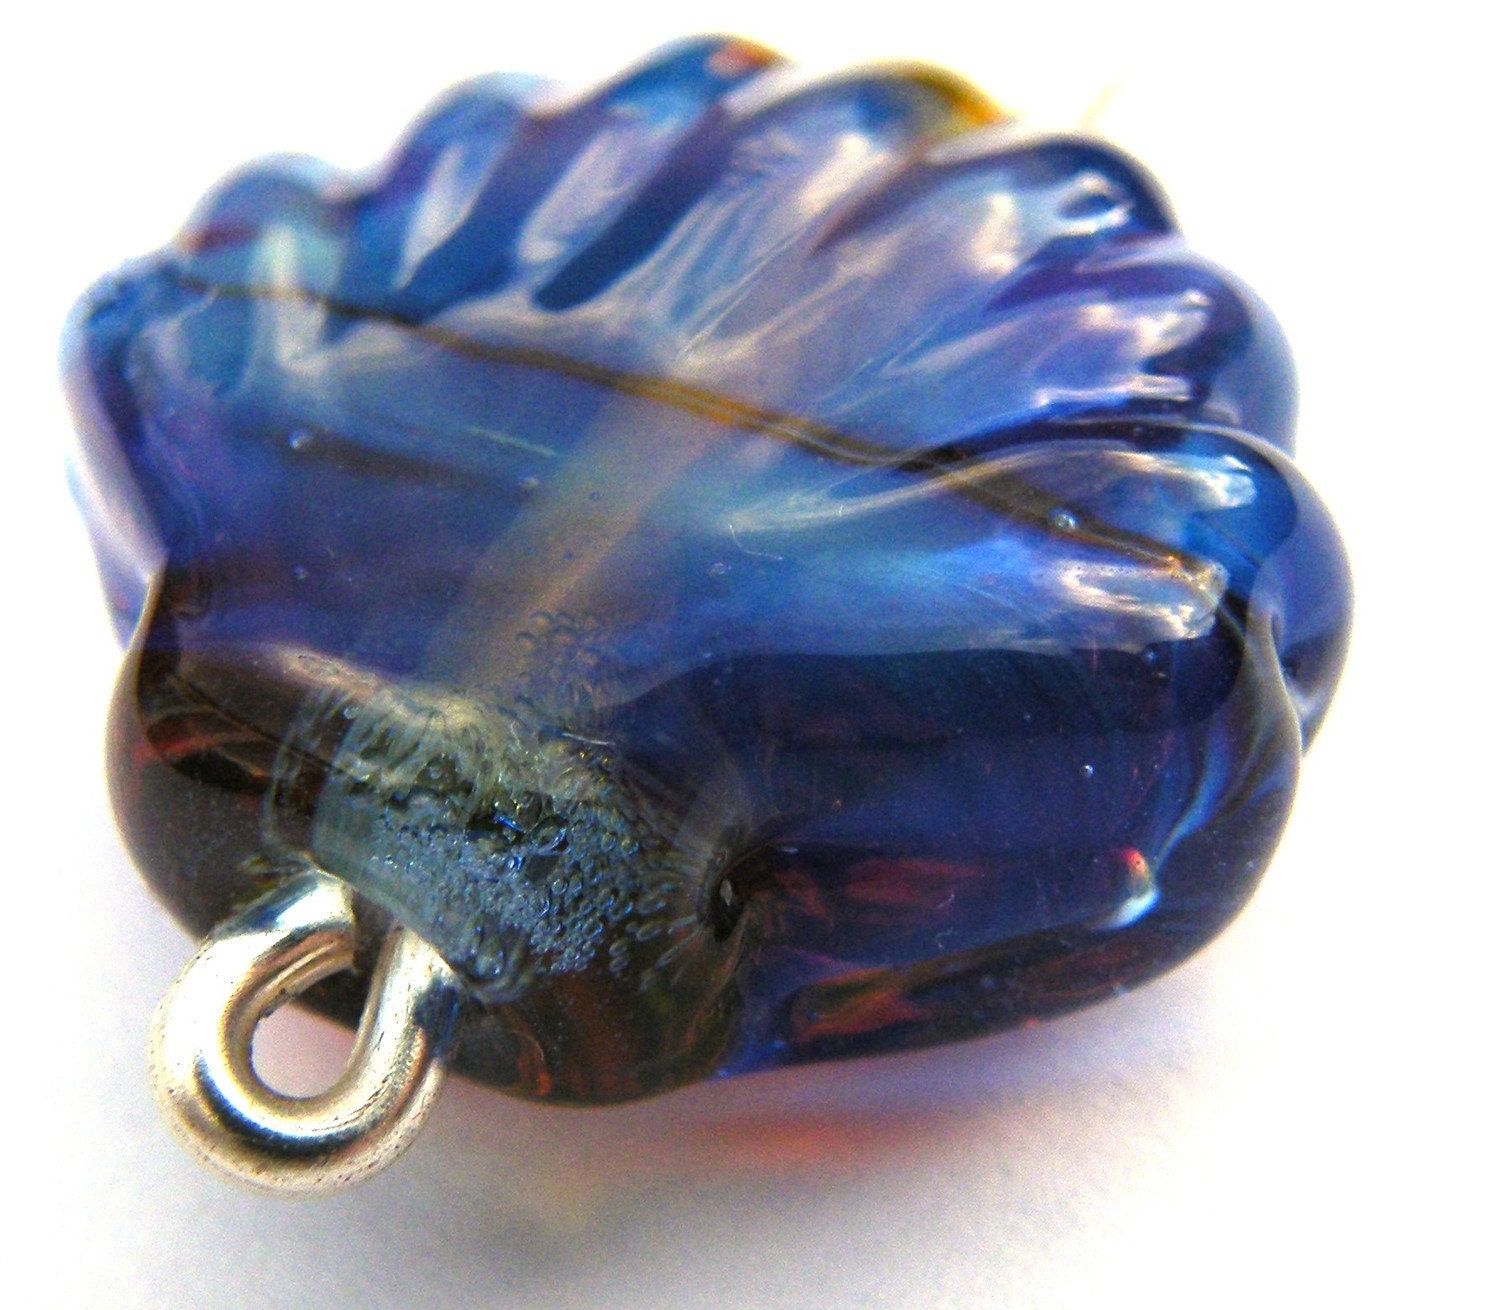 Large Shell Bead coated in clio which creates this fabulous purple and blue shimmer